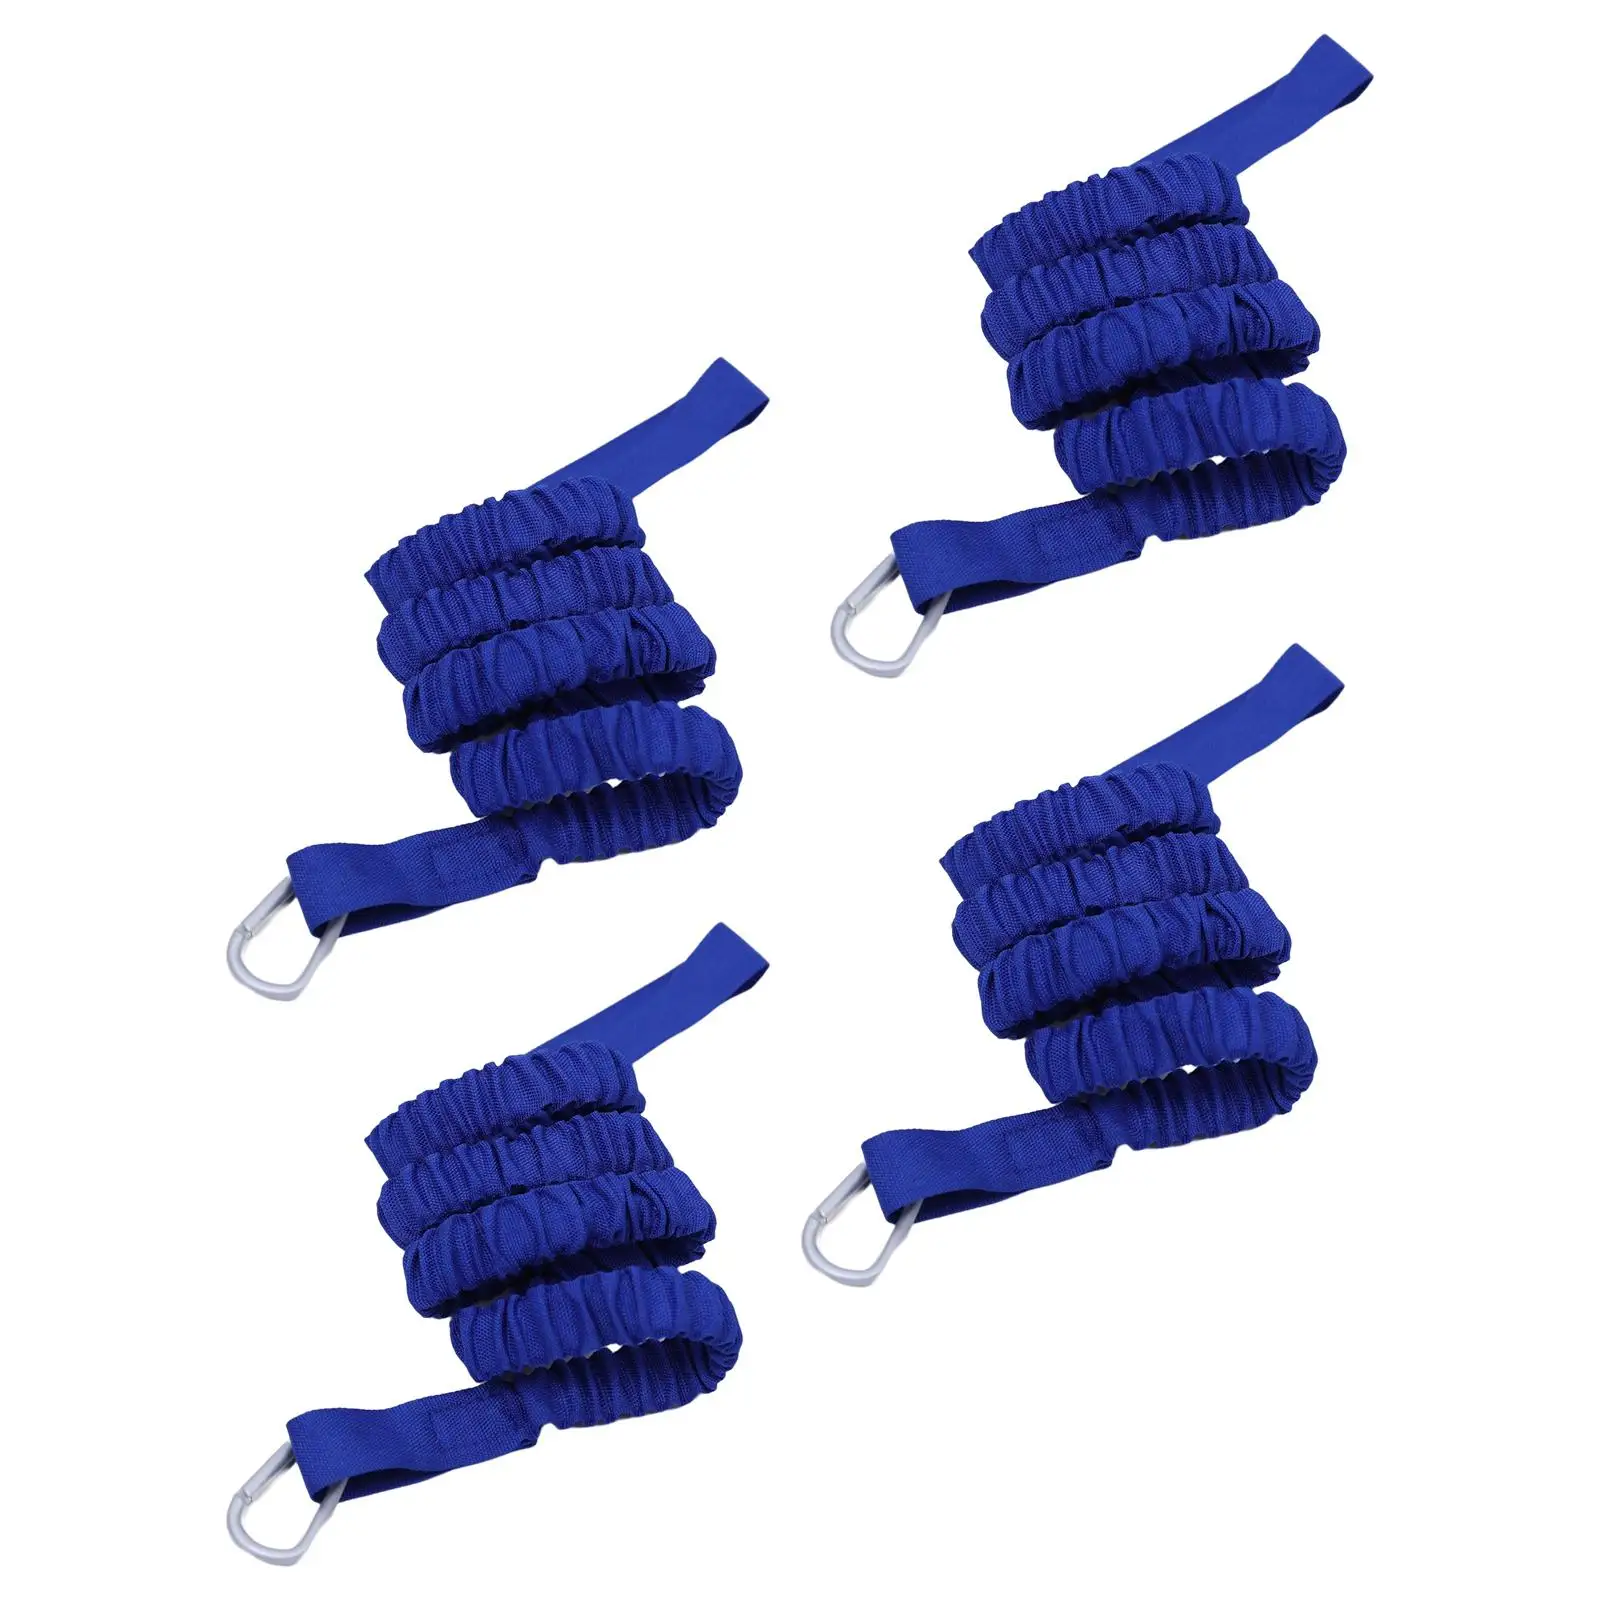 Kayak Paddle Lanyard Rod Leash Stretchable Coiled Good Elasticity for Canoeing Rafting Retractable from 37.4 to 61inch